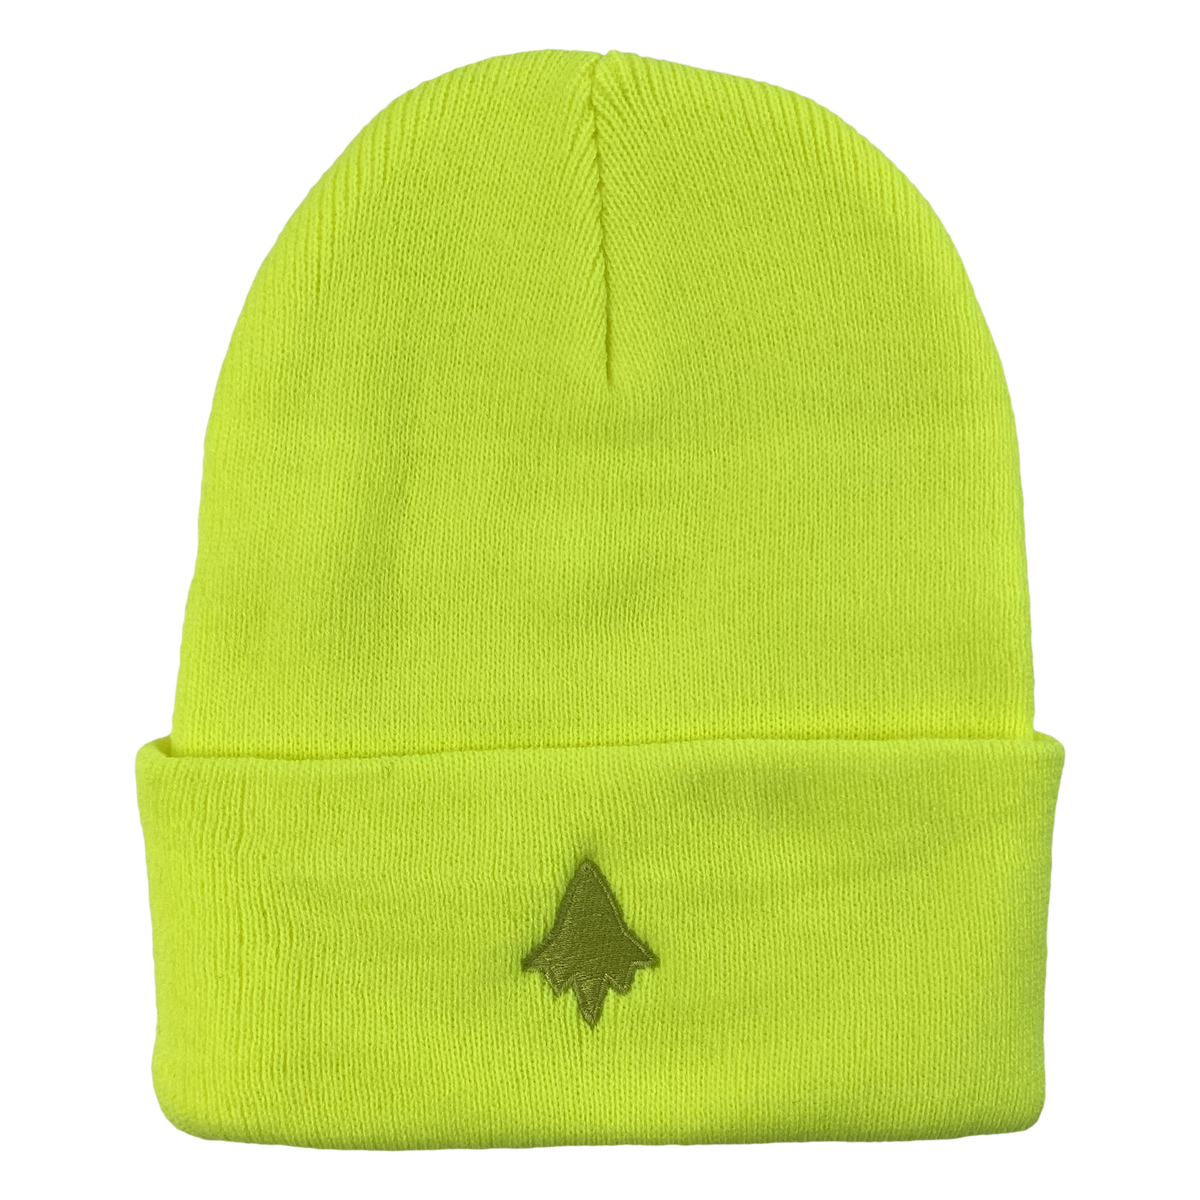 Infinity Shred - Safety Yellow Embroidered Beanie